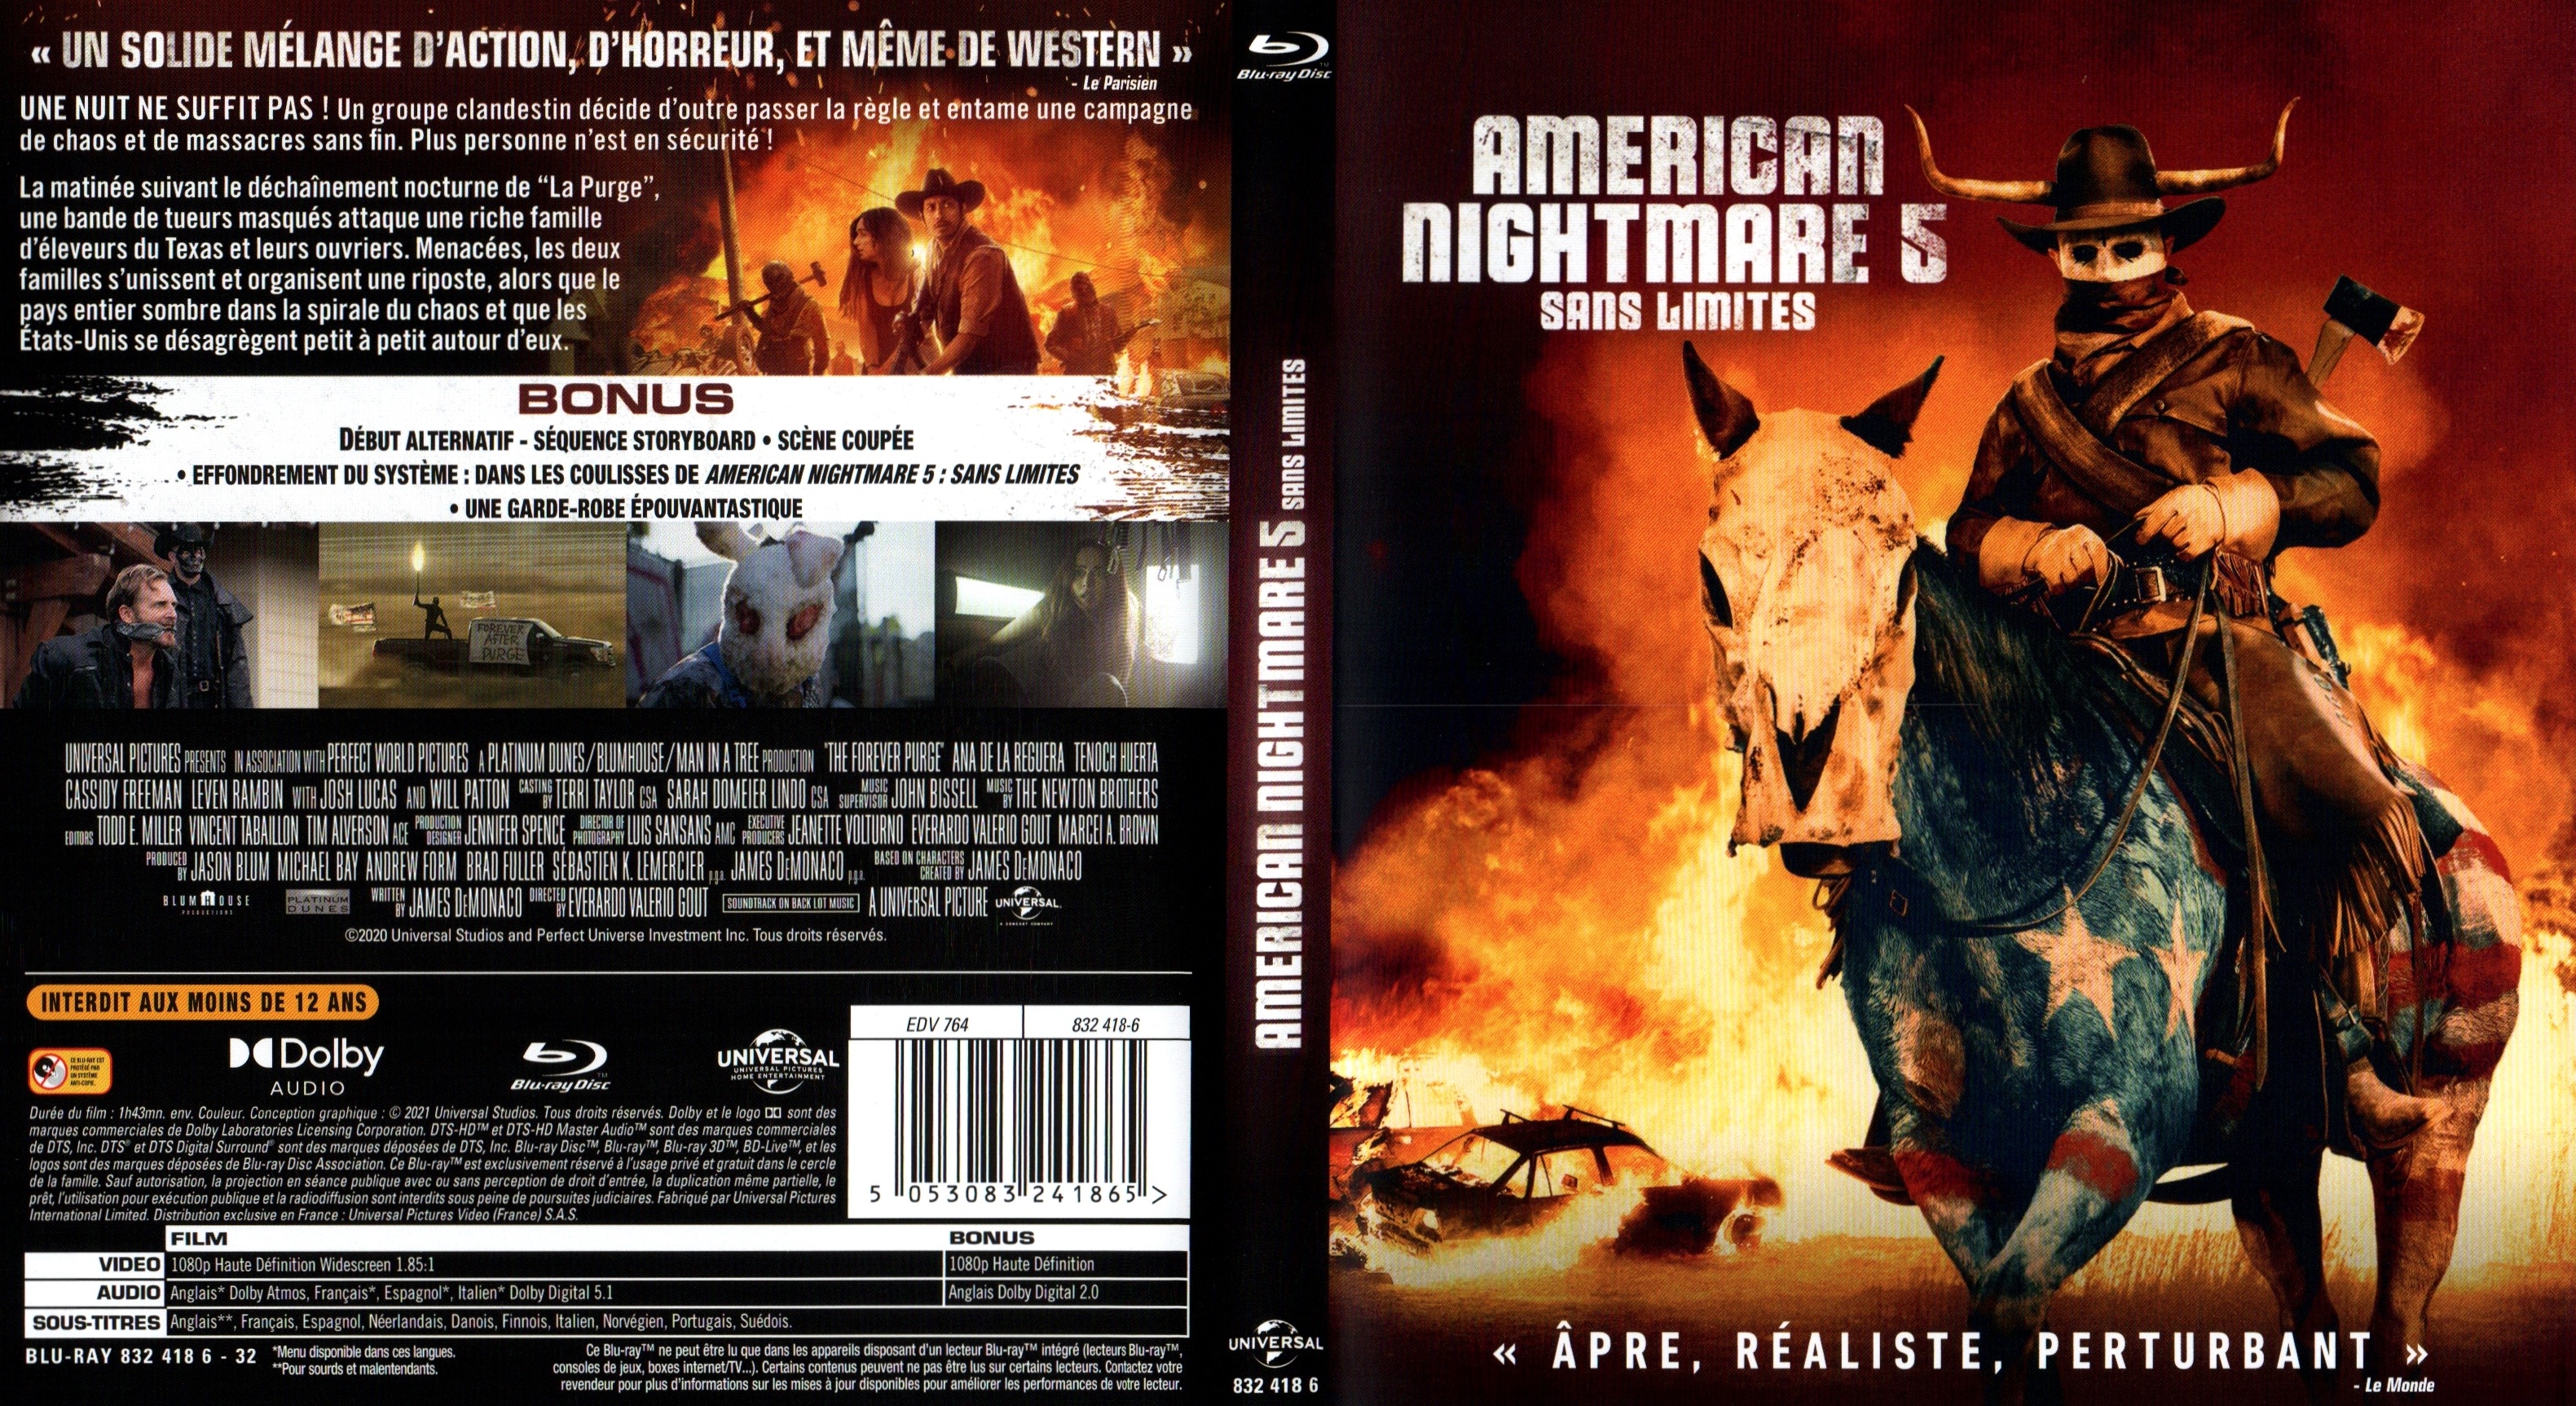 Jaquette DVD American nightmare 5 Sans limites (BLU-RAY)